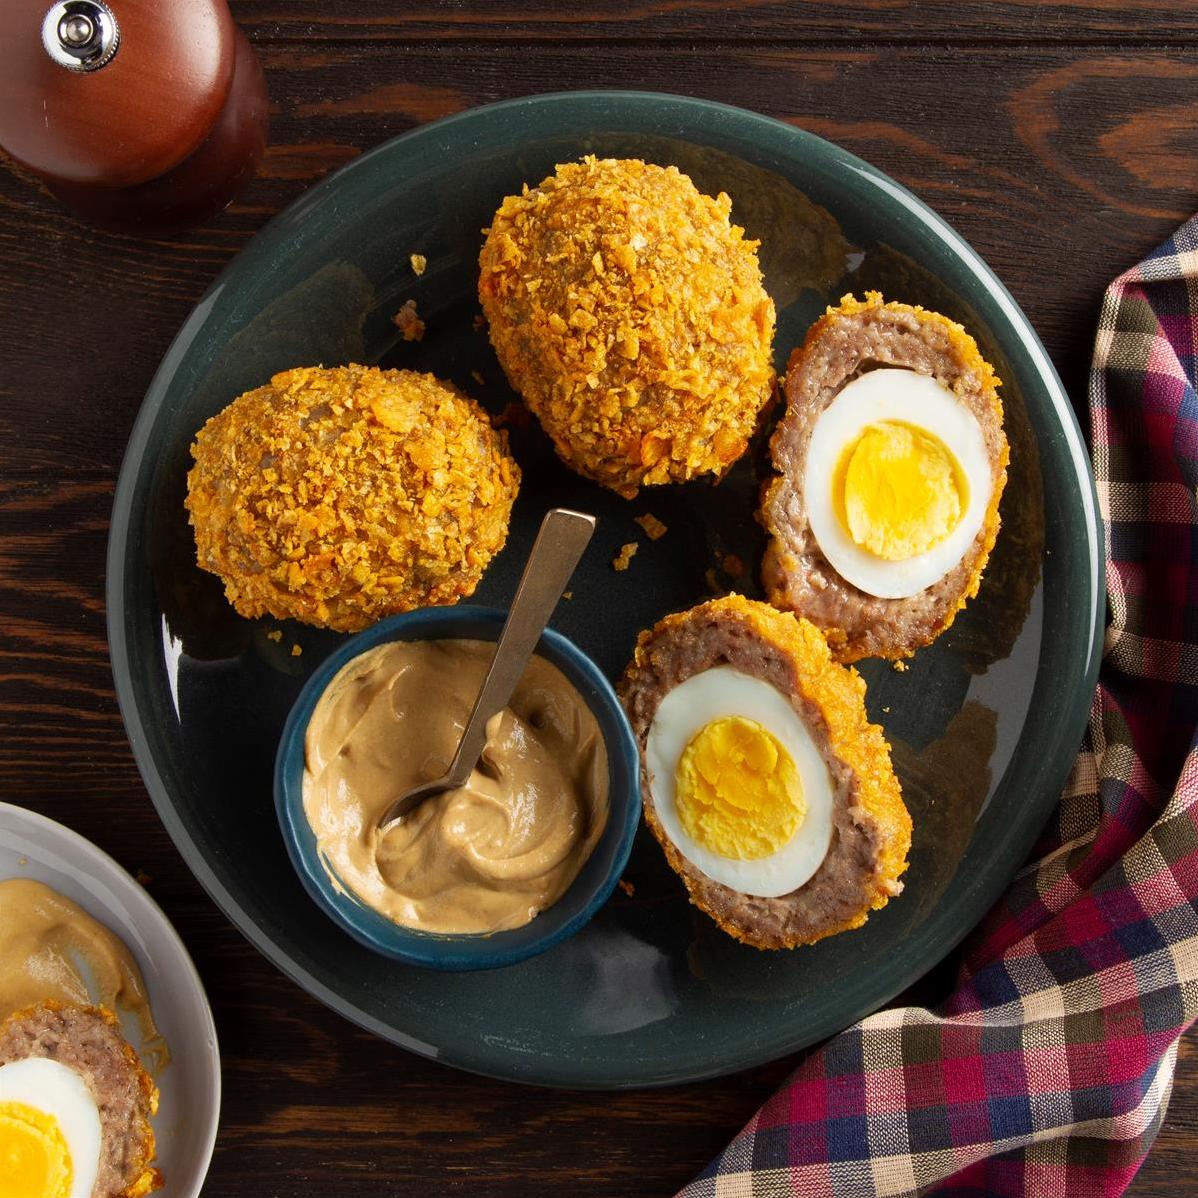  The ultimate comfort food, Hot Scotch Eggs are like a warm hug in every bite.